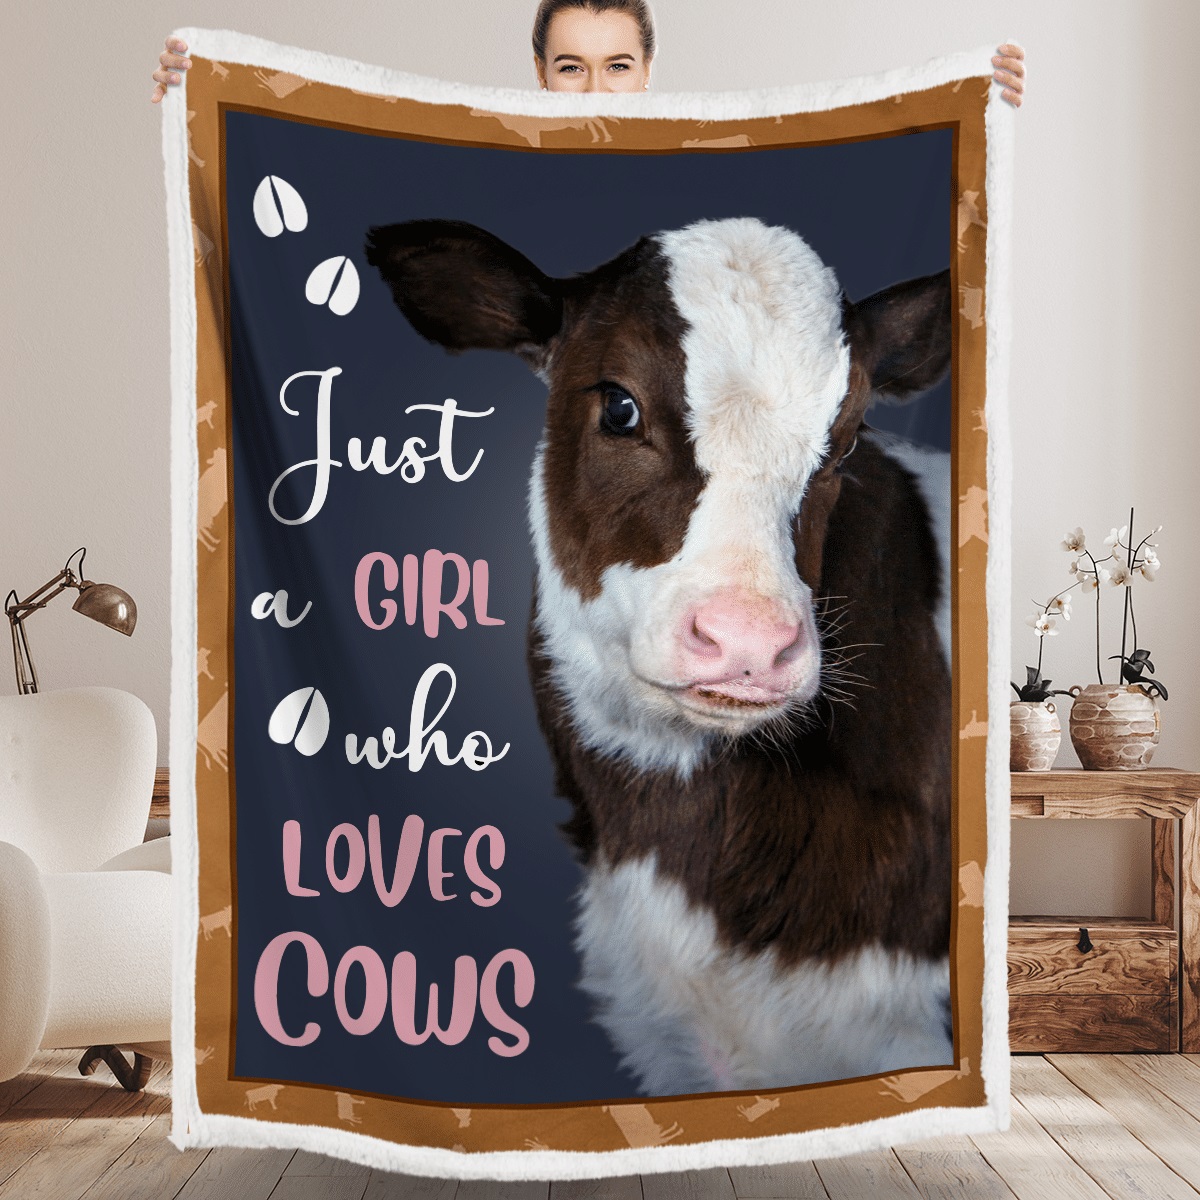 Just a girl who loves cows blanket